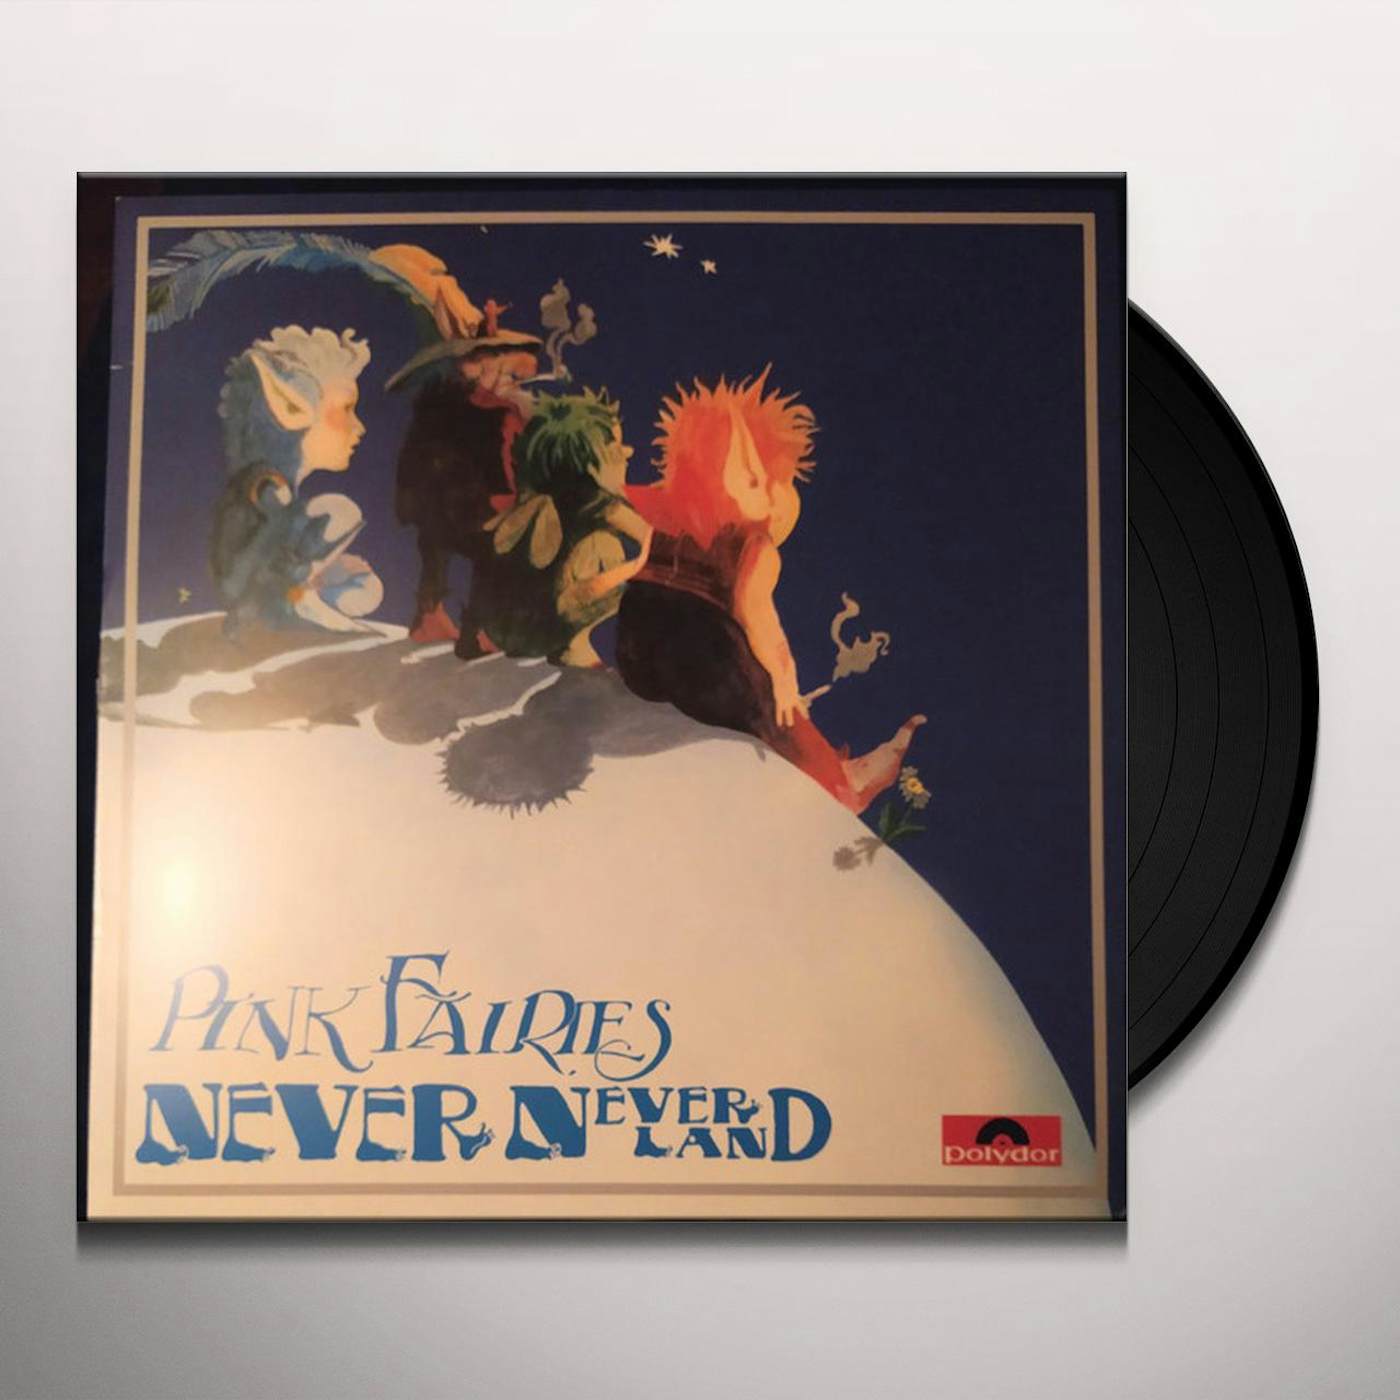 The Pink Fairies Neverneverland Vinyl Record